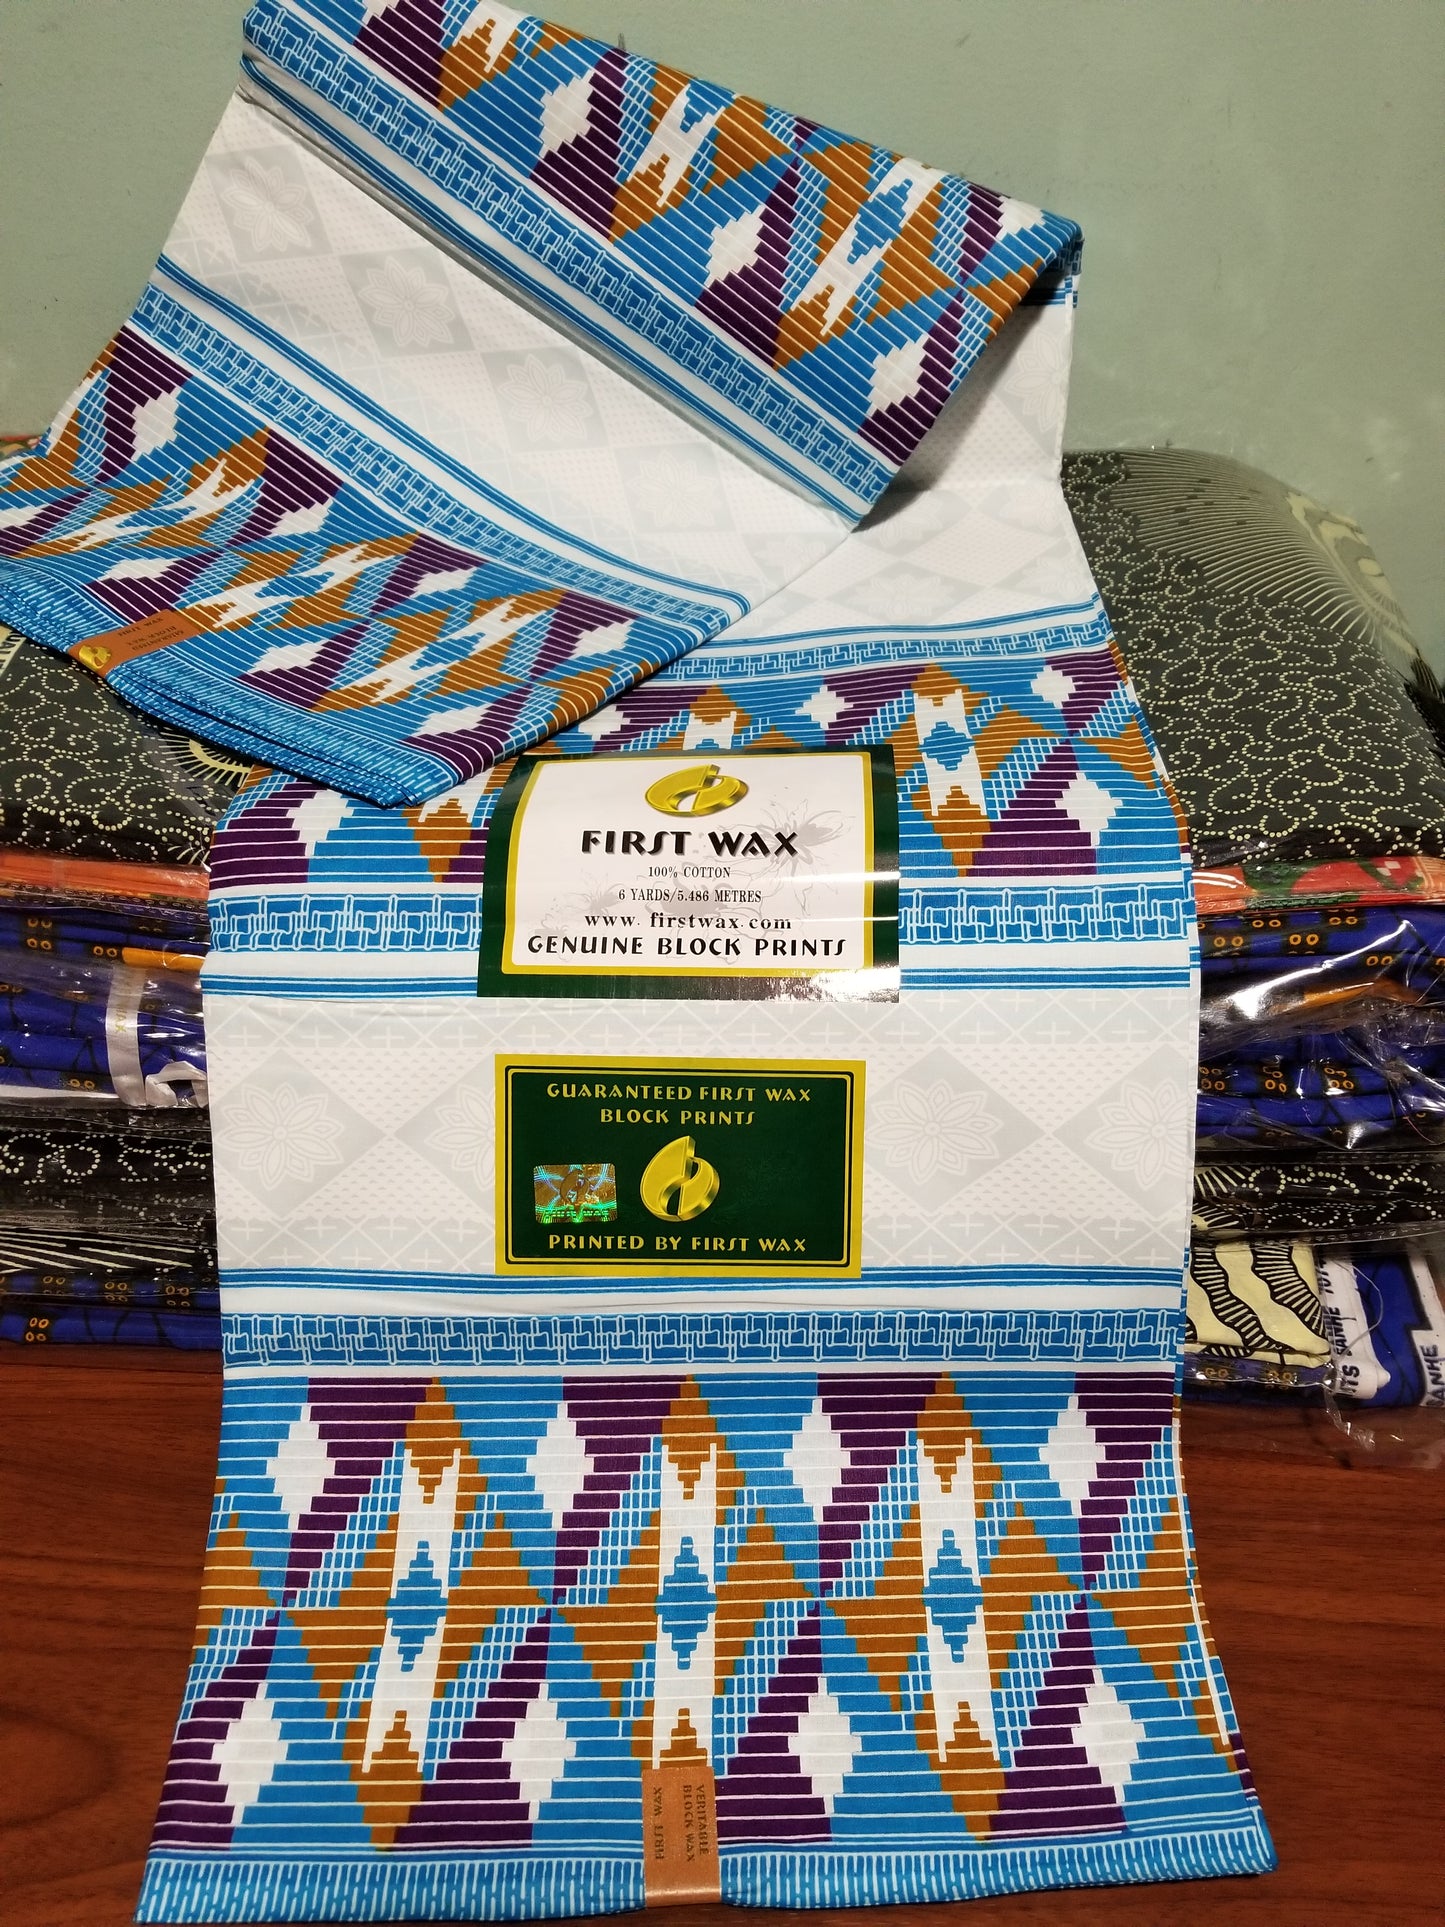 Latest Kente Ankara wax print fabric. Original luxery quality for men And women. Sold per 6yds. 100% cotton Ankara wax print fabric.